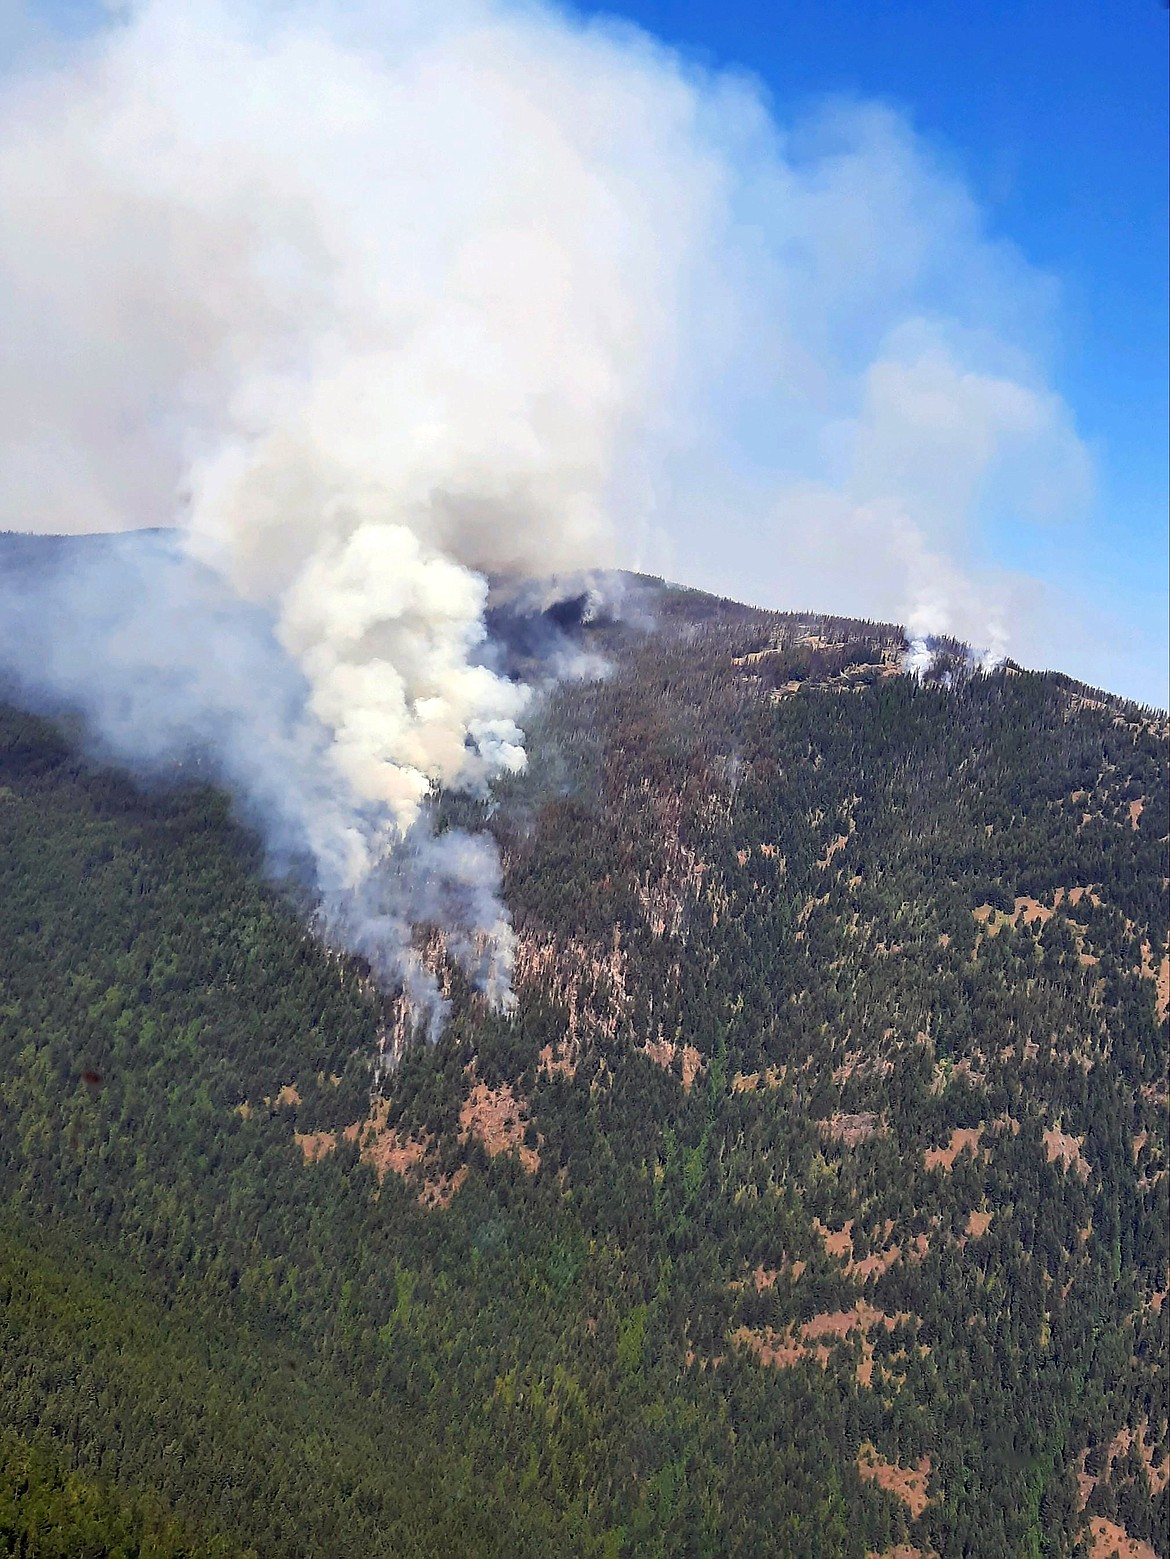 An aerial view of the Eneas Peak Fire taken on Aug. 19. The fire is now considered part of the Kootenai River Complex, which has burned just under 11,000 acres in Boundary County.